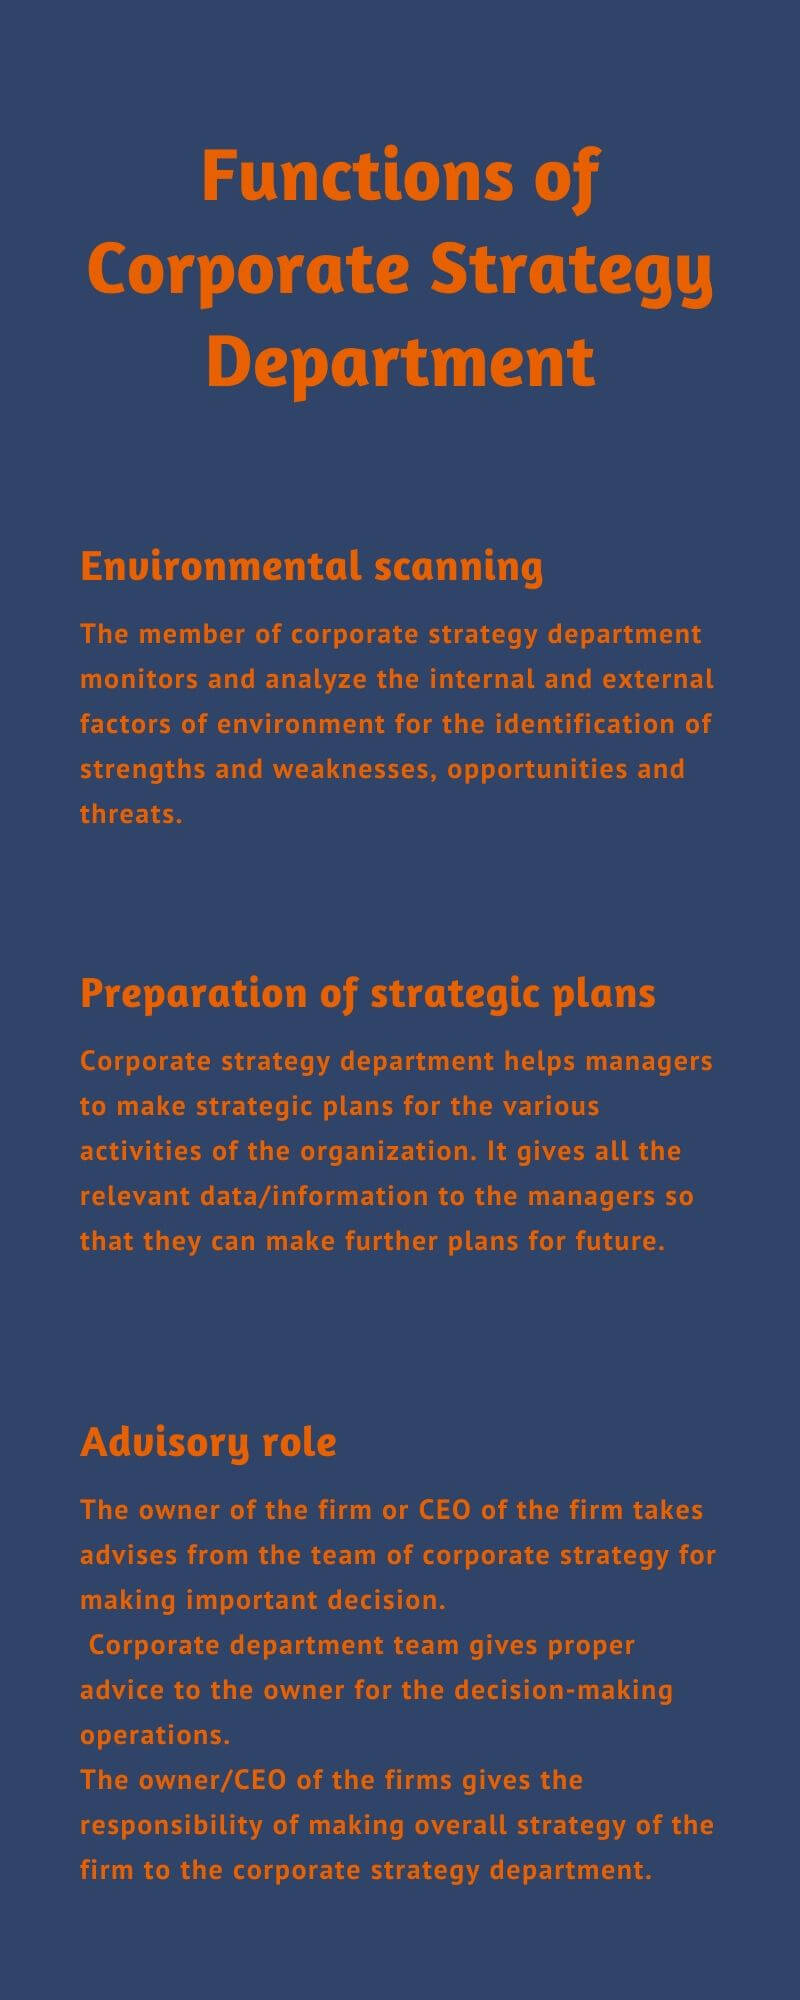 Functions of Corporate Strategy Department